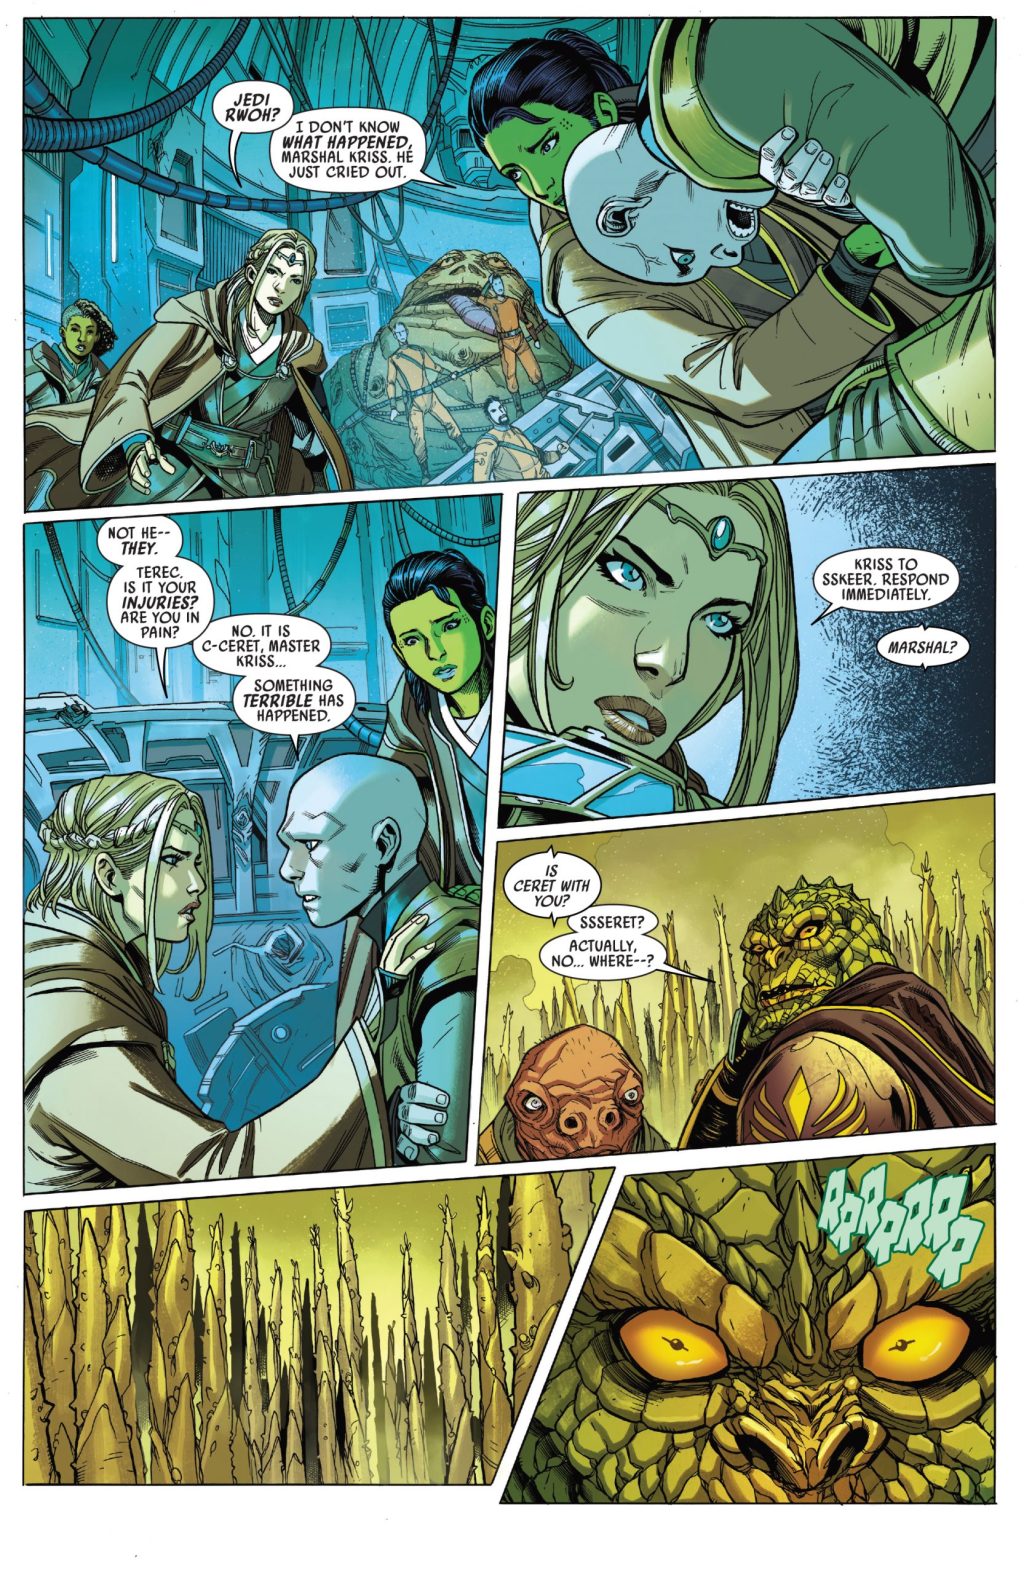 Avar Kriss corrects Vern Rwoh on her pronoun usage towards the non-binary padawan Terec in Star Wars - The High Republic Vol. 1 Issue #2 (2021), Marvel Comics. Words by Cavan Scott, Art by Ario Anindito.